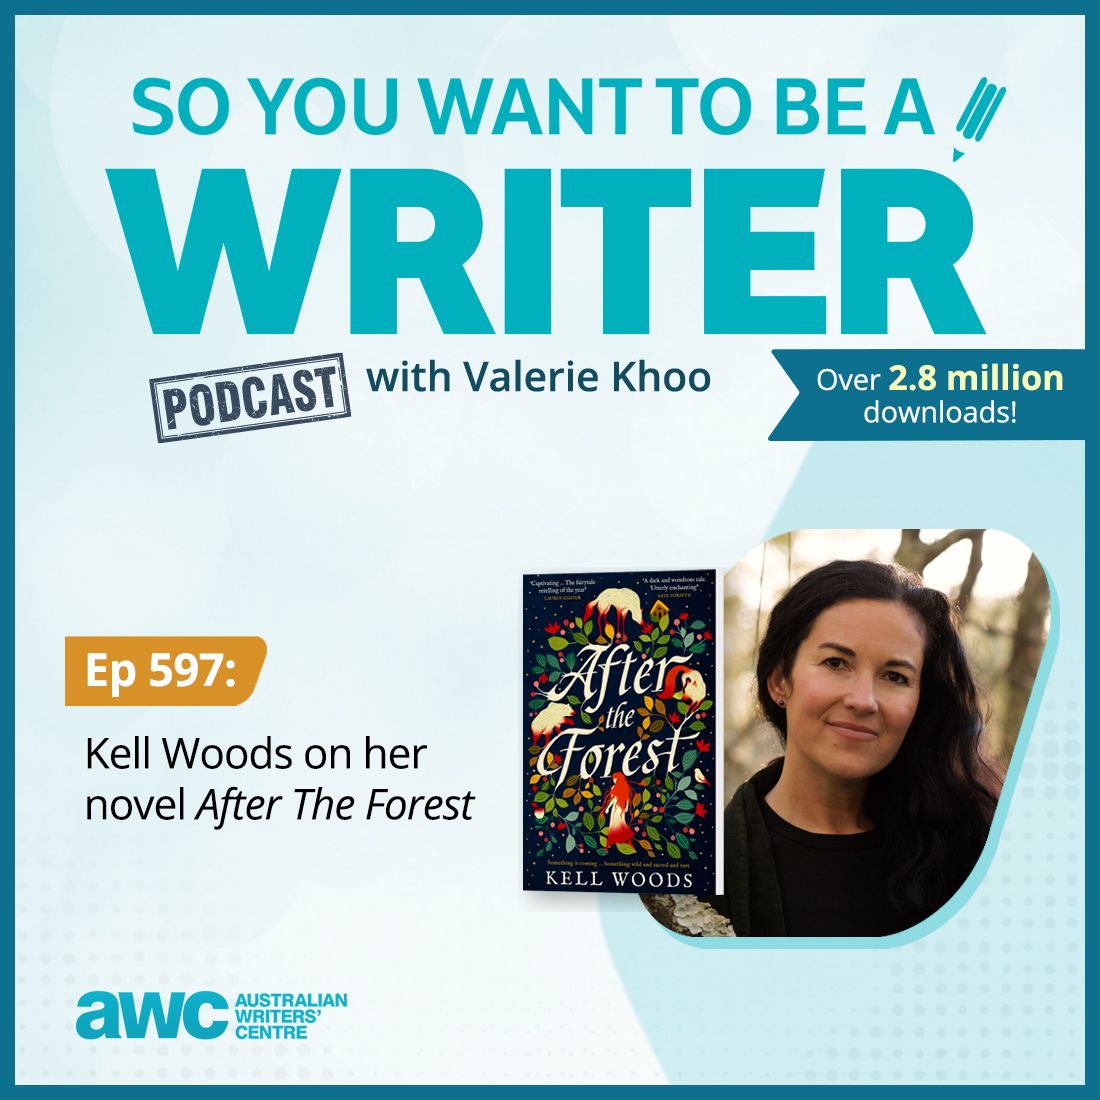 Kell Woods (@kellinthewoods) on her novel ‘After The Forest’ (@HarperVoyagerAU, @HarperCollinsAU). Listen to the latest episode of ‘So You Want to be a Writer’ on your favourite podcast app, or follow the link: writerscentre.com.au/blog/ep-597/